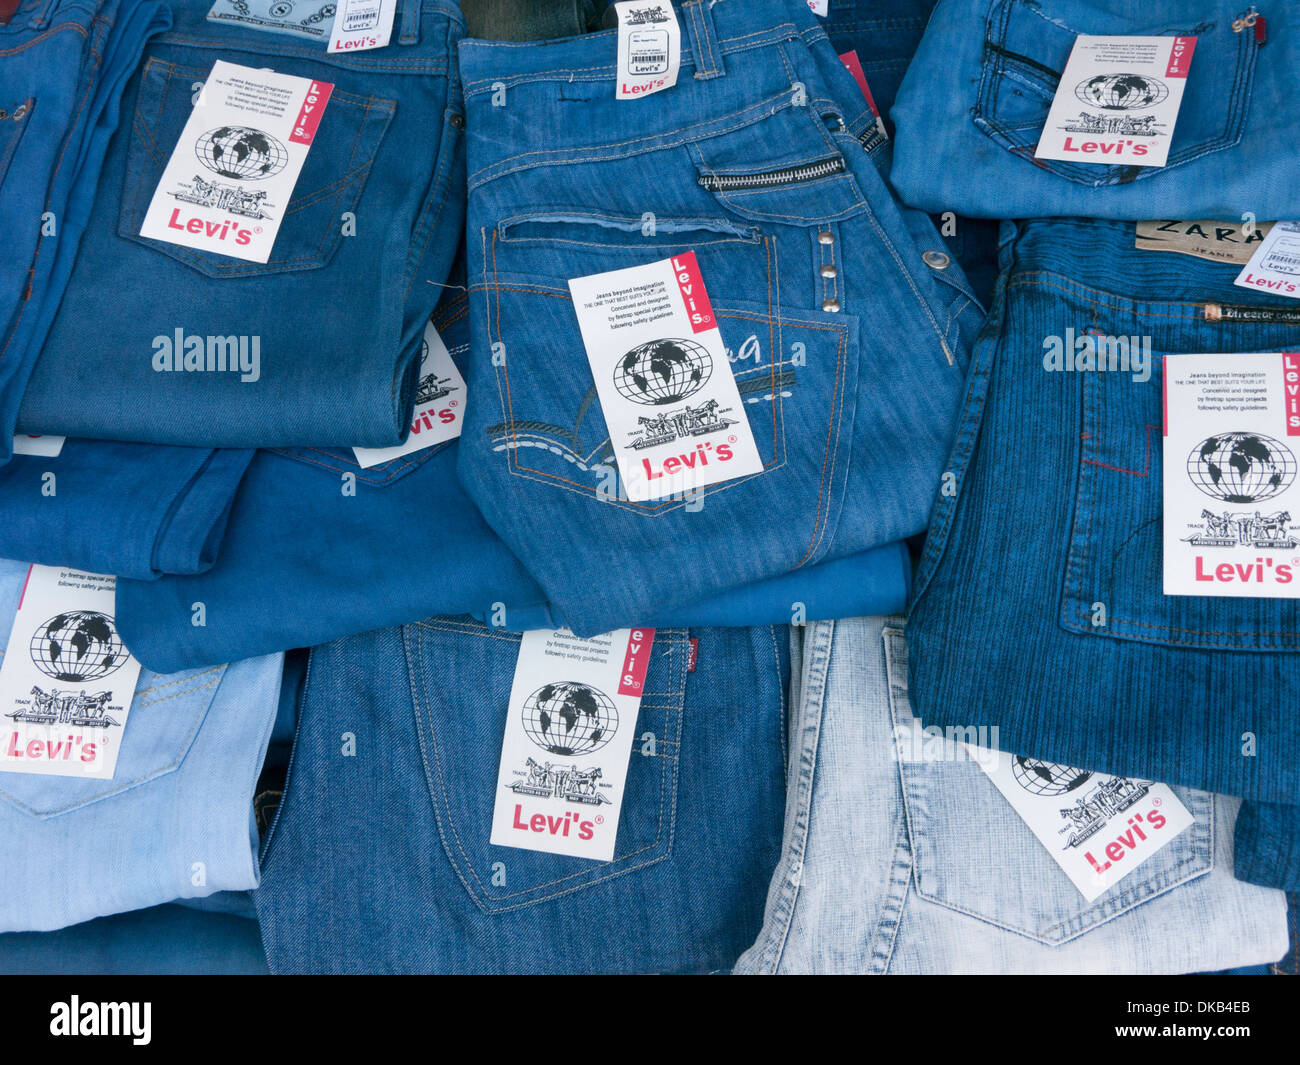 Fake counterfeit Levi's jeans on sale in India Stock Photo - Alamy